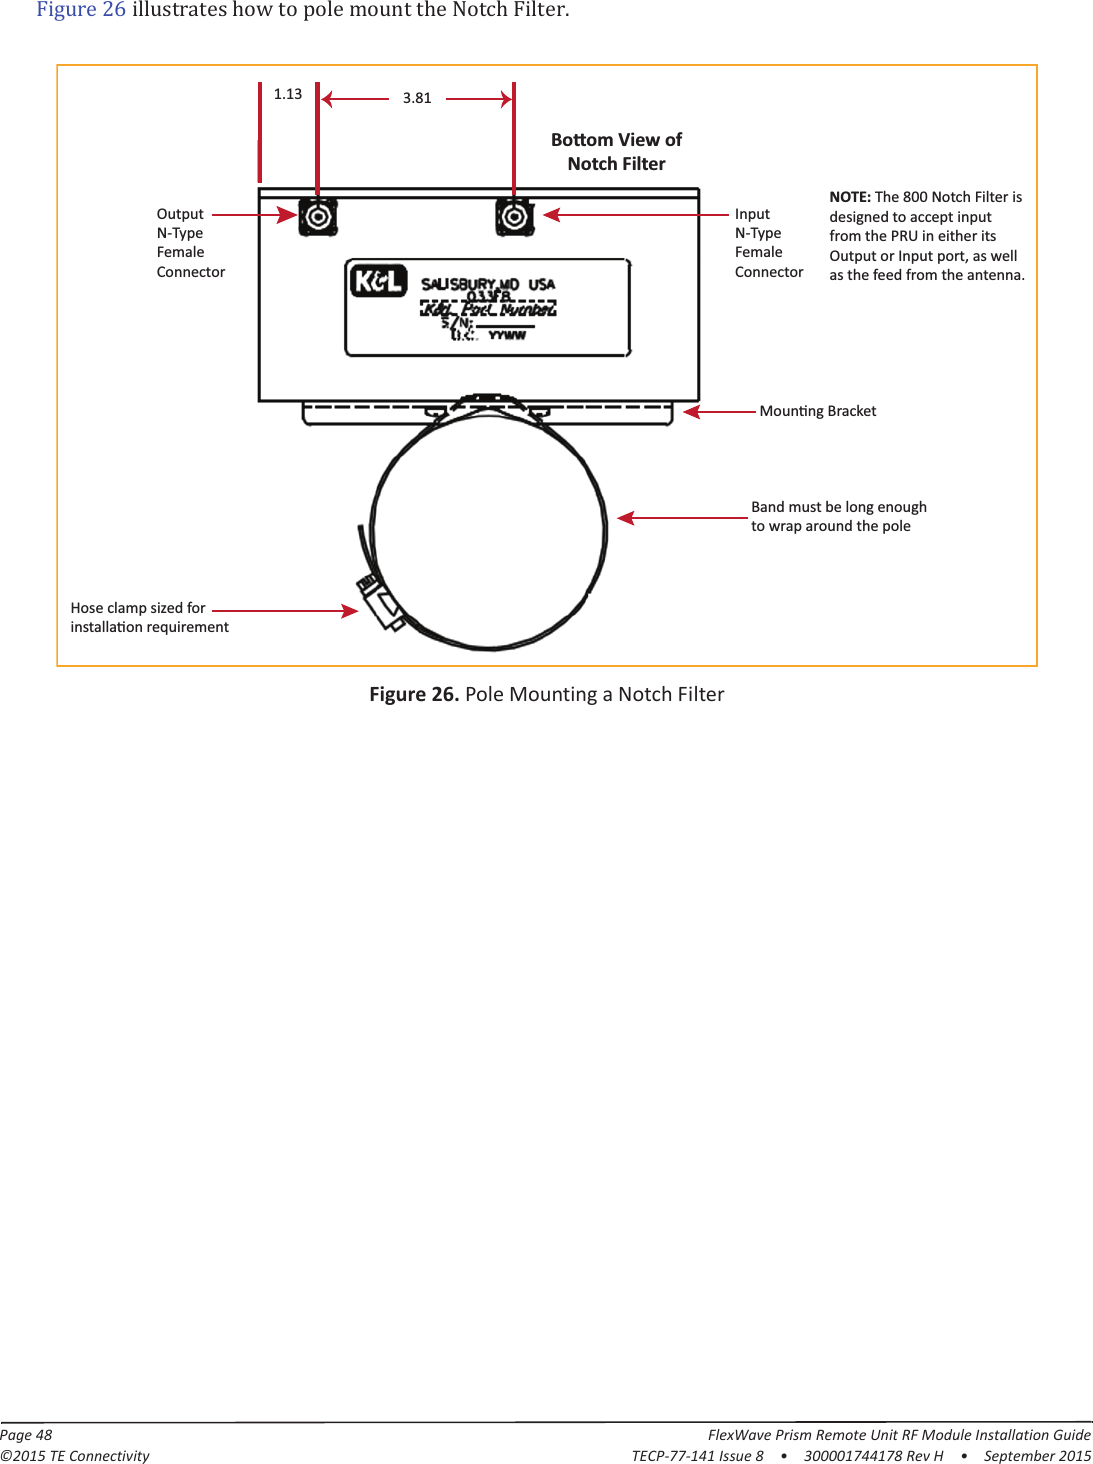 Page 48 FlexWave Prism Remote Unit RF Module Installation Guide©2015 TE Connectivity TECP-77-141 Issue 8  •  300001744178 Rev H  •  September 2015ʹ͸ǤFigure 26. Pole Mounting a Notch Filter1.13 3.81InputN-TypeFemaleConnectorOutput N-TypeFemaleConnectorBand must be long enoughto wrap around the poleBoƩom View ofNotch FilterHose clamp sized forinstallaƟon requirementMounƟng BracketNOTE: The 800 Notch Filter isdesigned to accept input from the PRU in either itsOutput or Input port, as well as the feed from the antenna.  